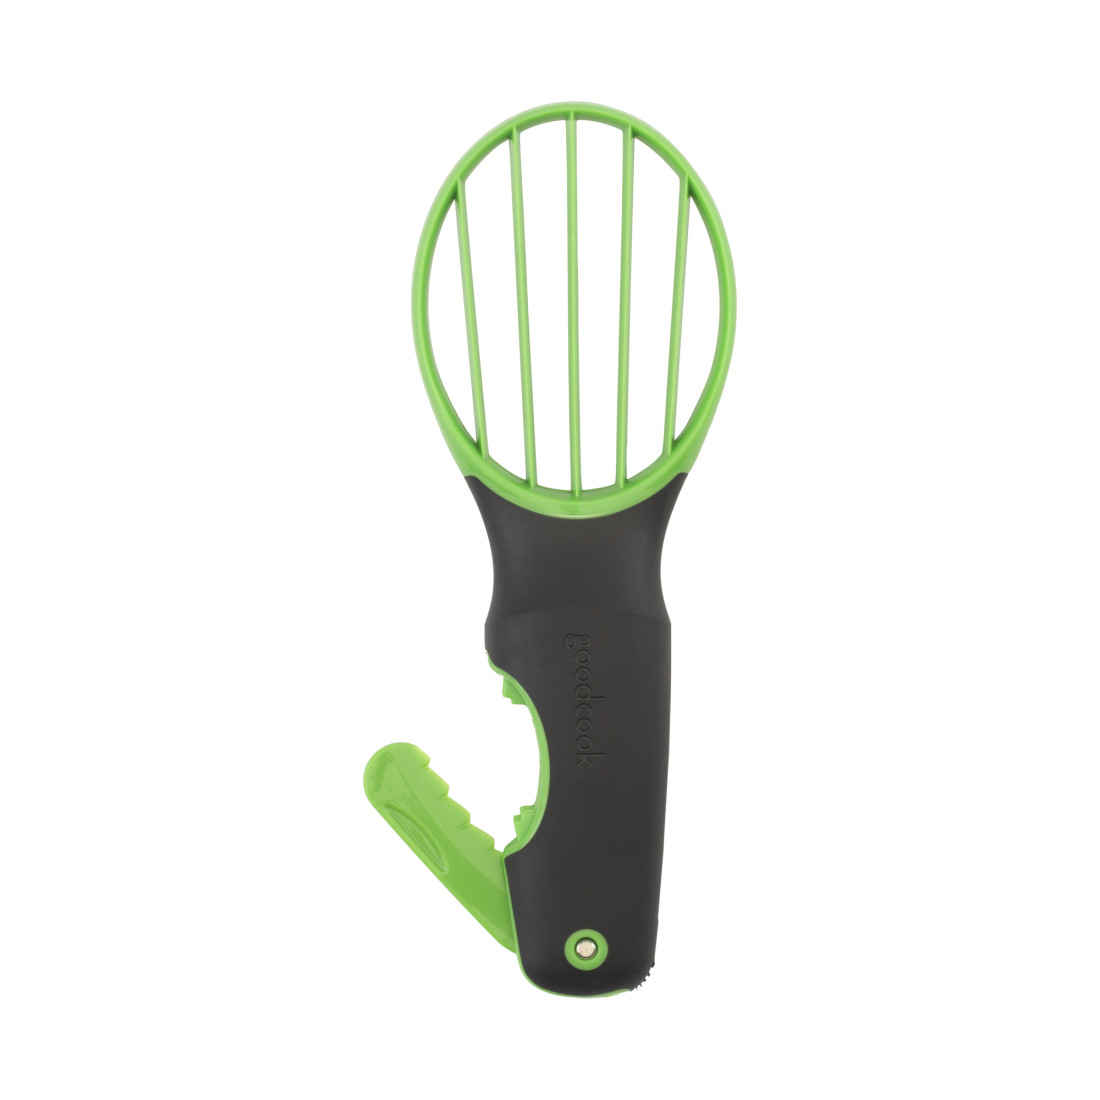 HLCM Avocado Slicer - Avocado Cutter Tool for Avocado Shredders and Pitter, 3-in-1 Avocado Slicer, Avocado Slicer Kitchen Gadget, Perfect for